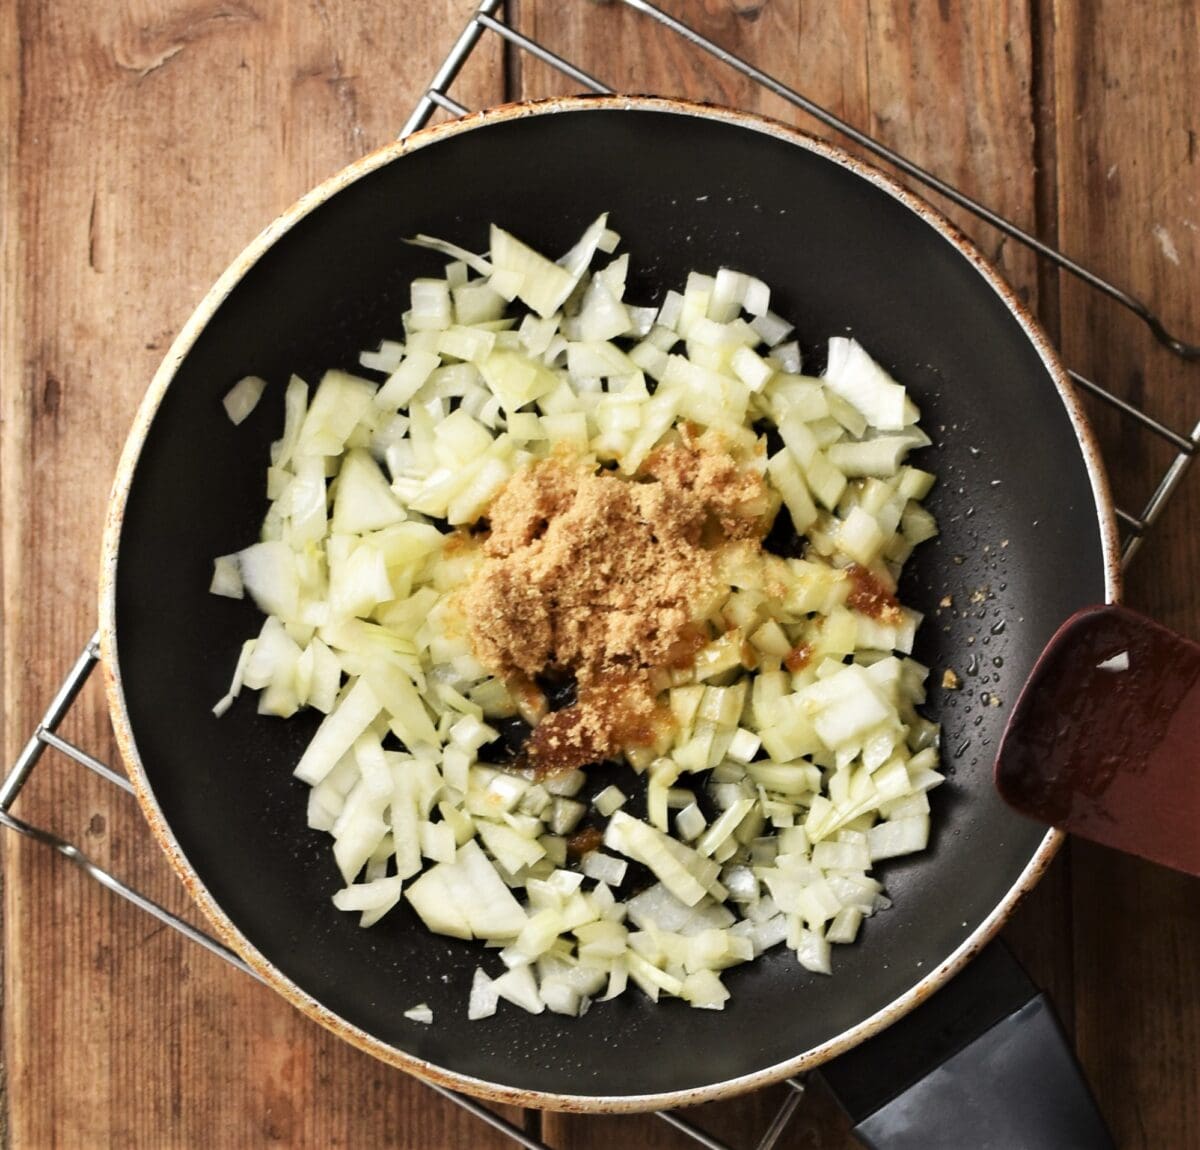 Chopped onions with brown sugar in pan.